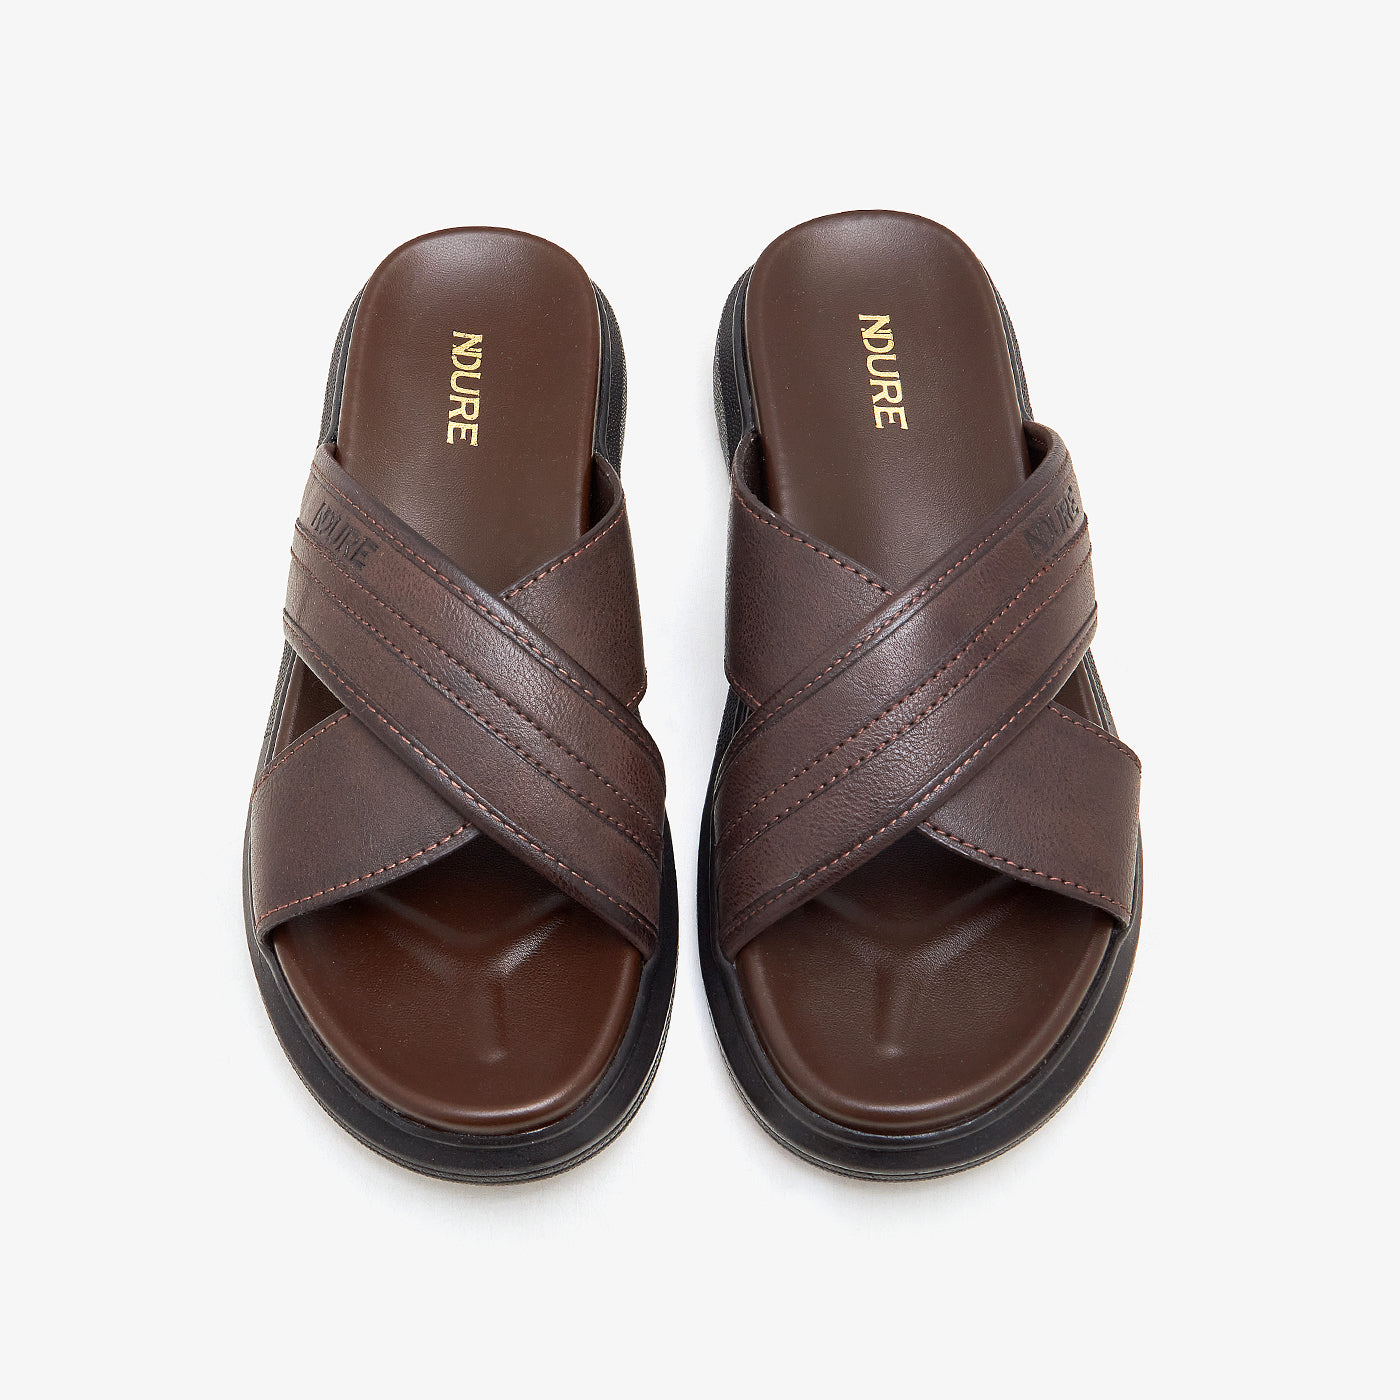 Sophisticated Men's Chappals